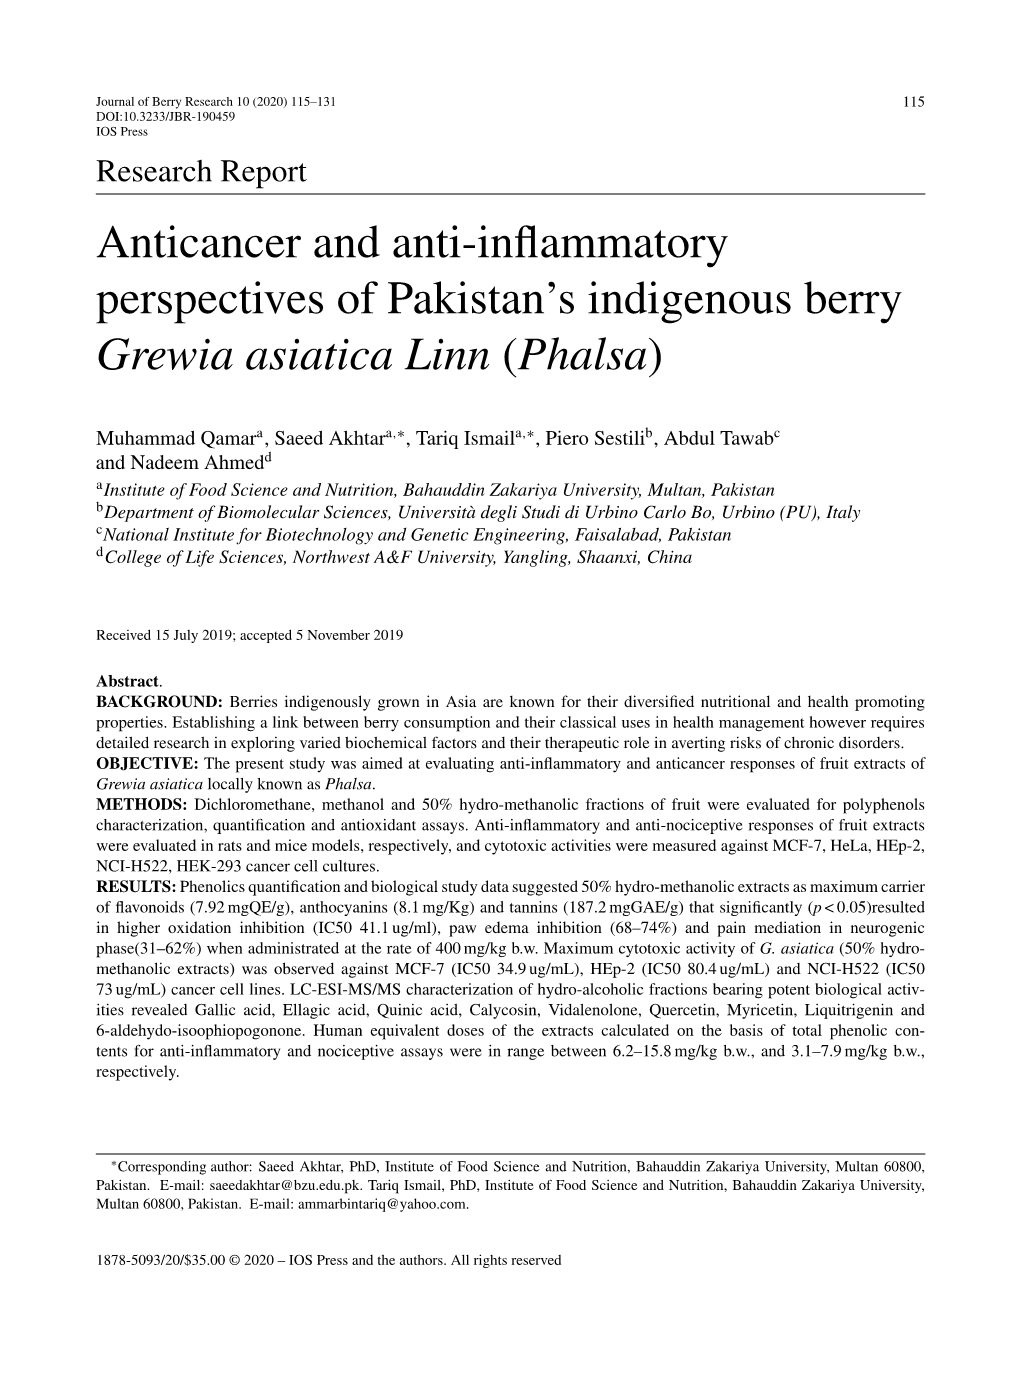 Anticancer and Anti-Inflammatory Perspectives of Pakistan's